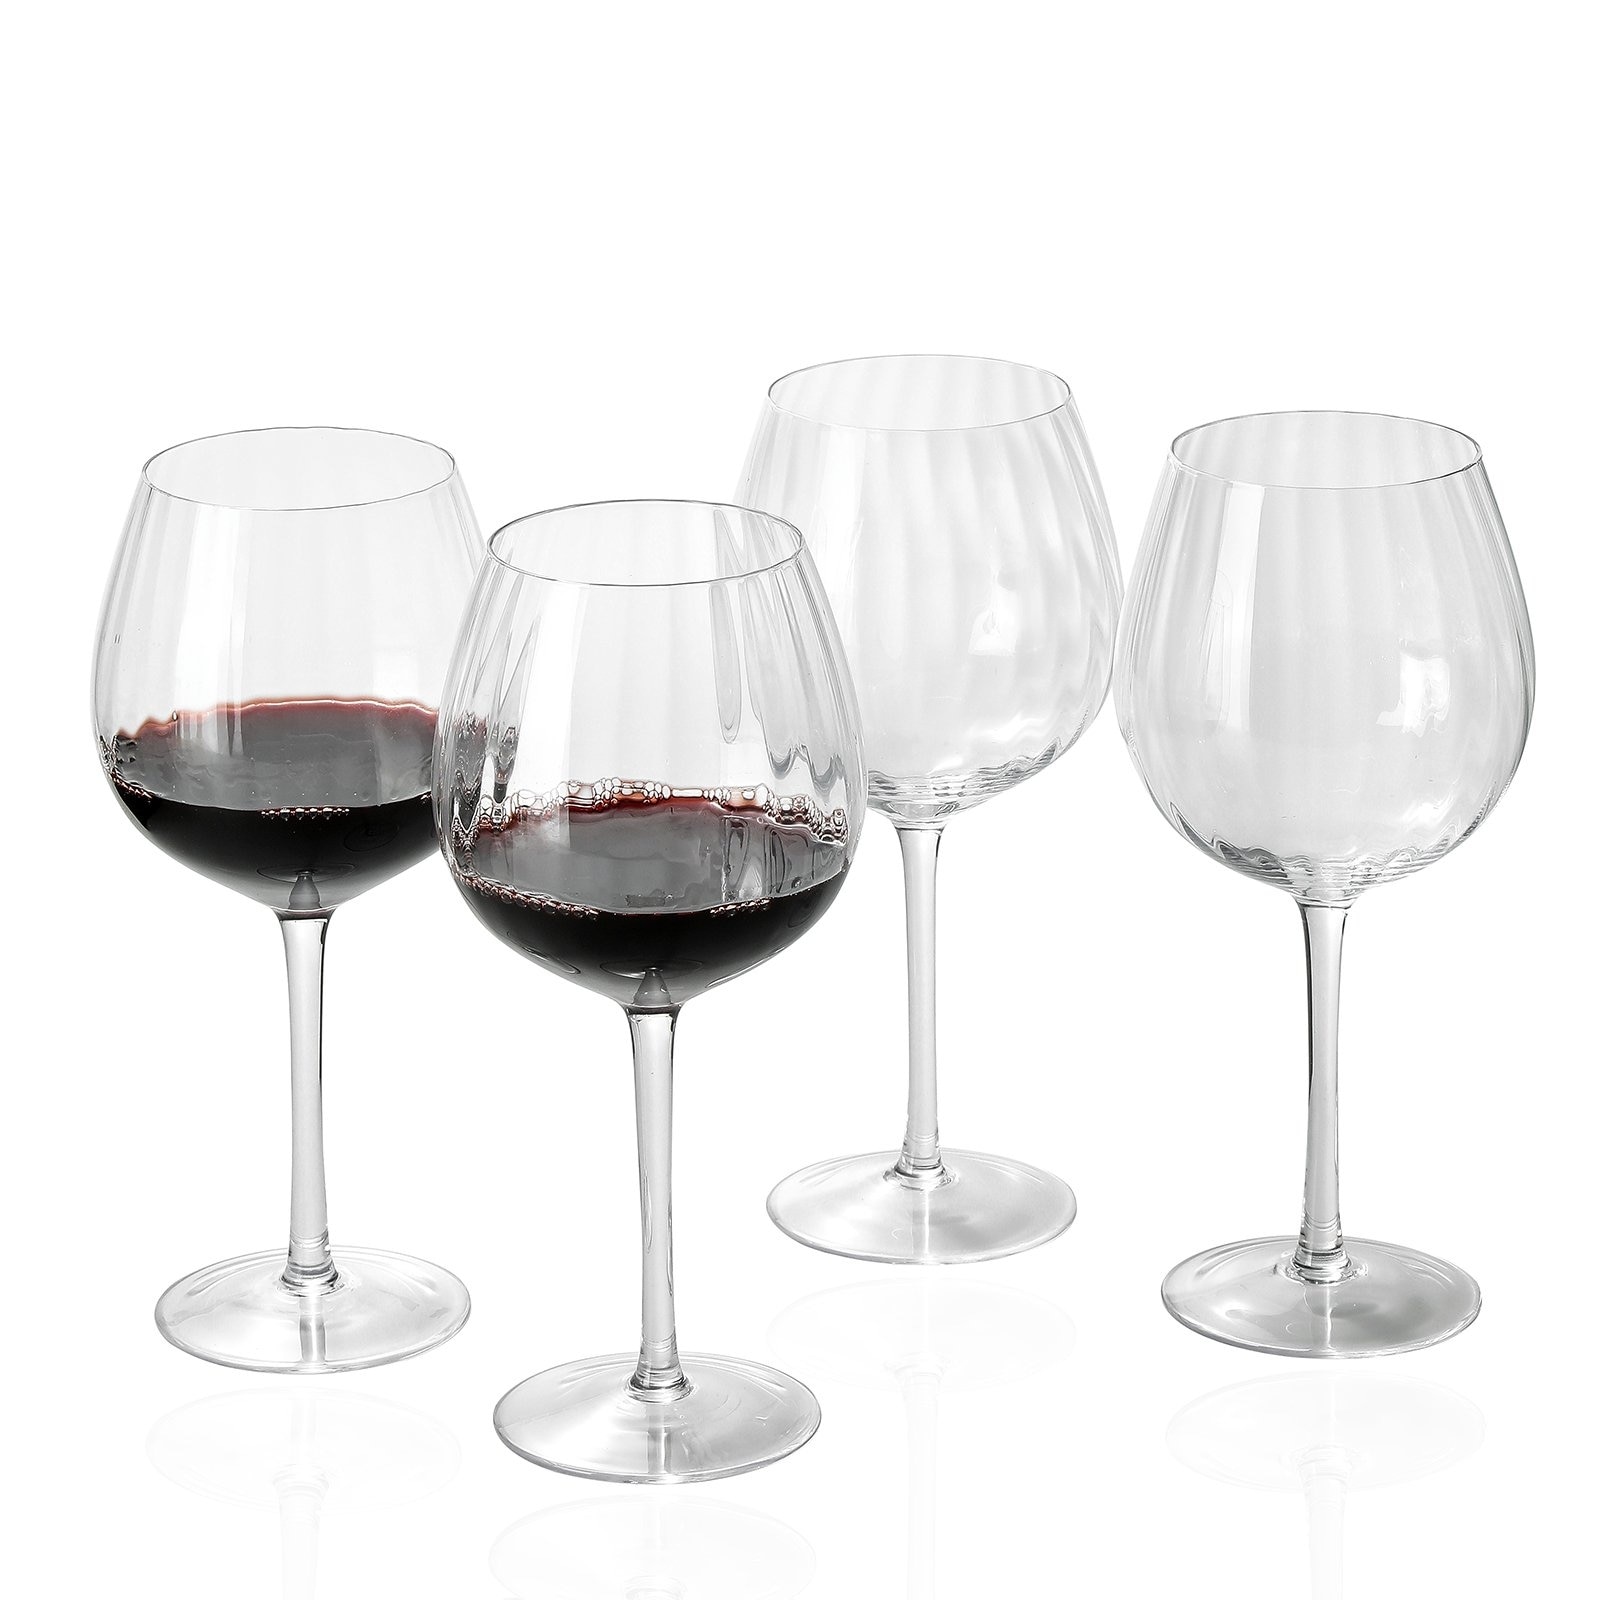 Lidy Colored Wine Glasses Set of 4 - Real Glass Wine Gifts | 13.5 oz Red  Wine Glasses Set of 4 | Col…See more Lidy Colored Wine Glasses Set of 4 